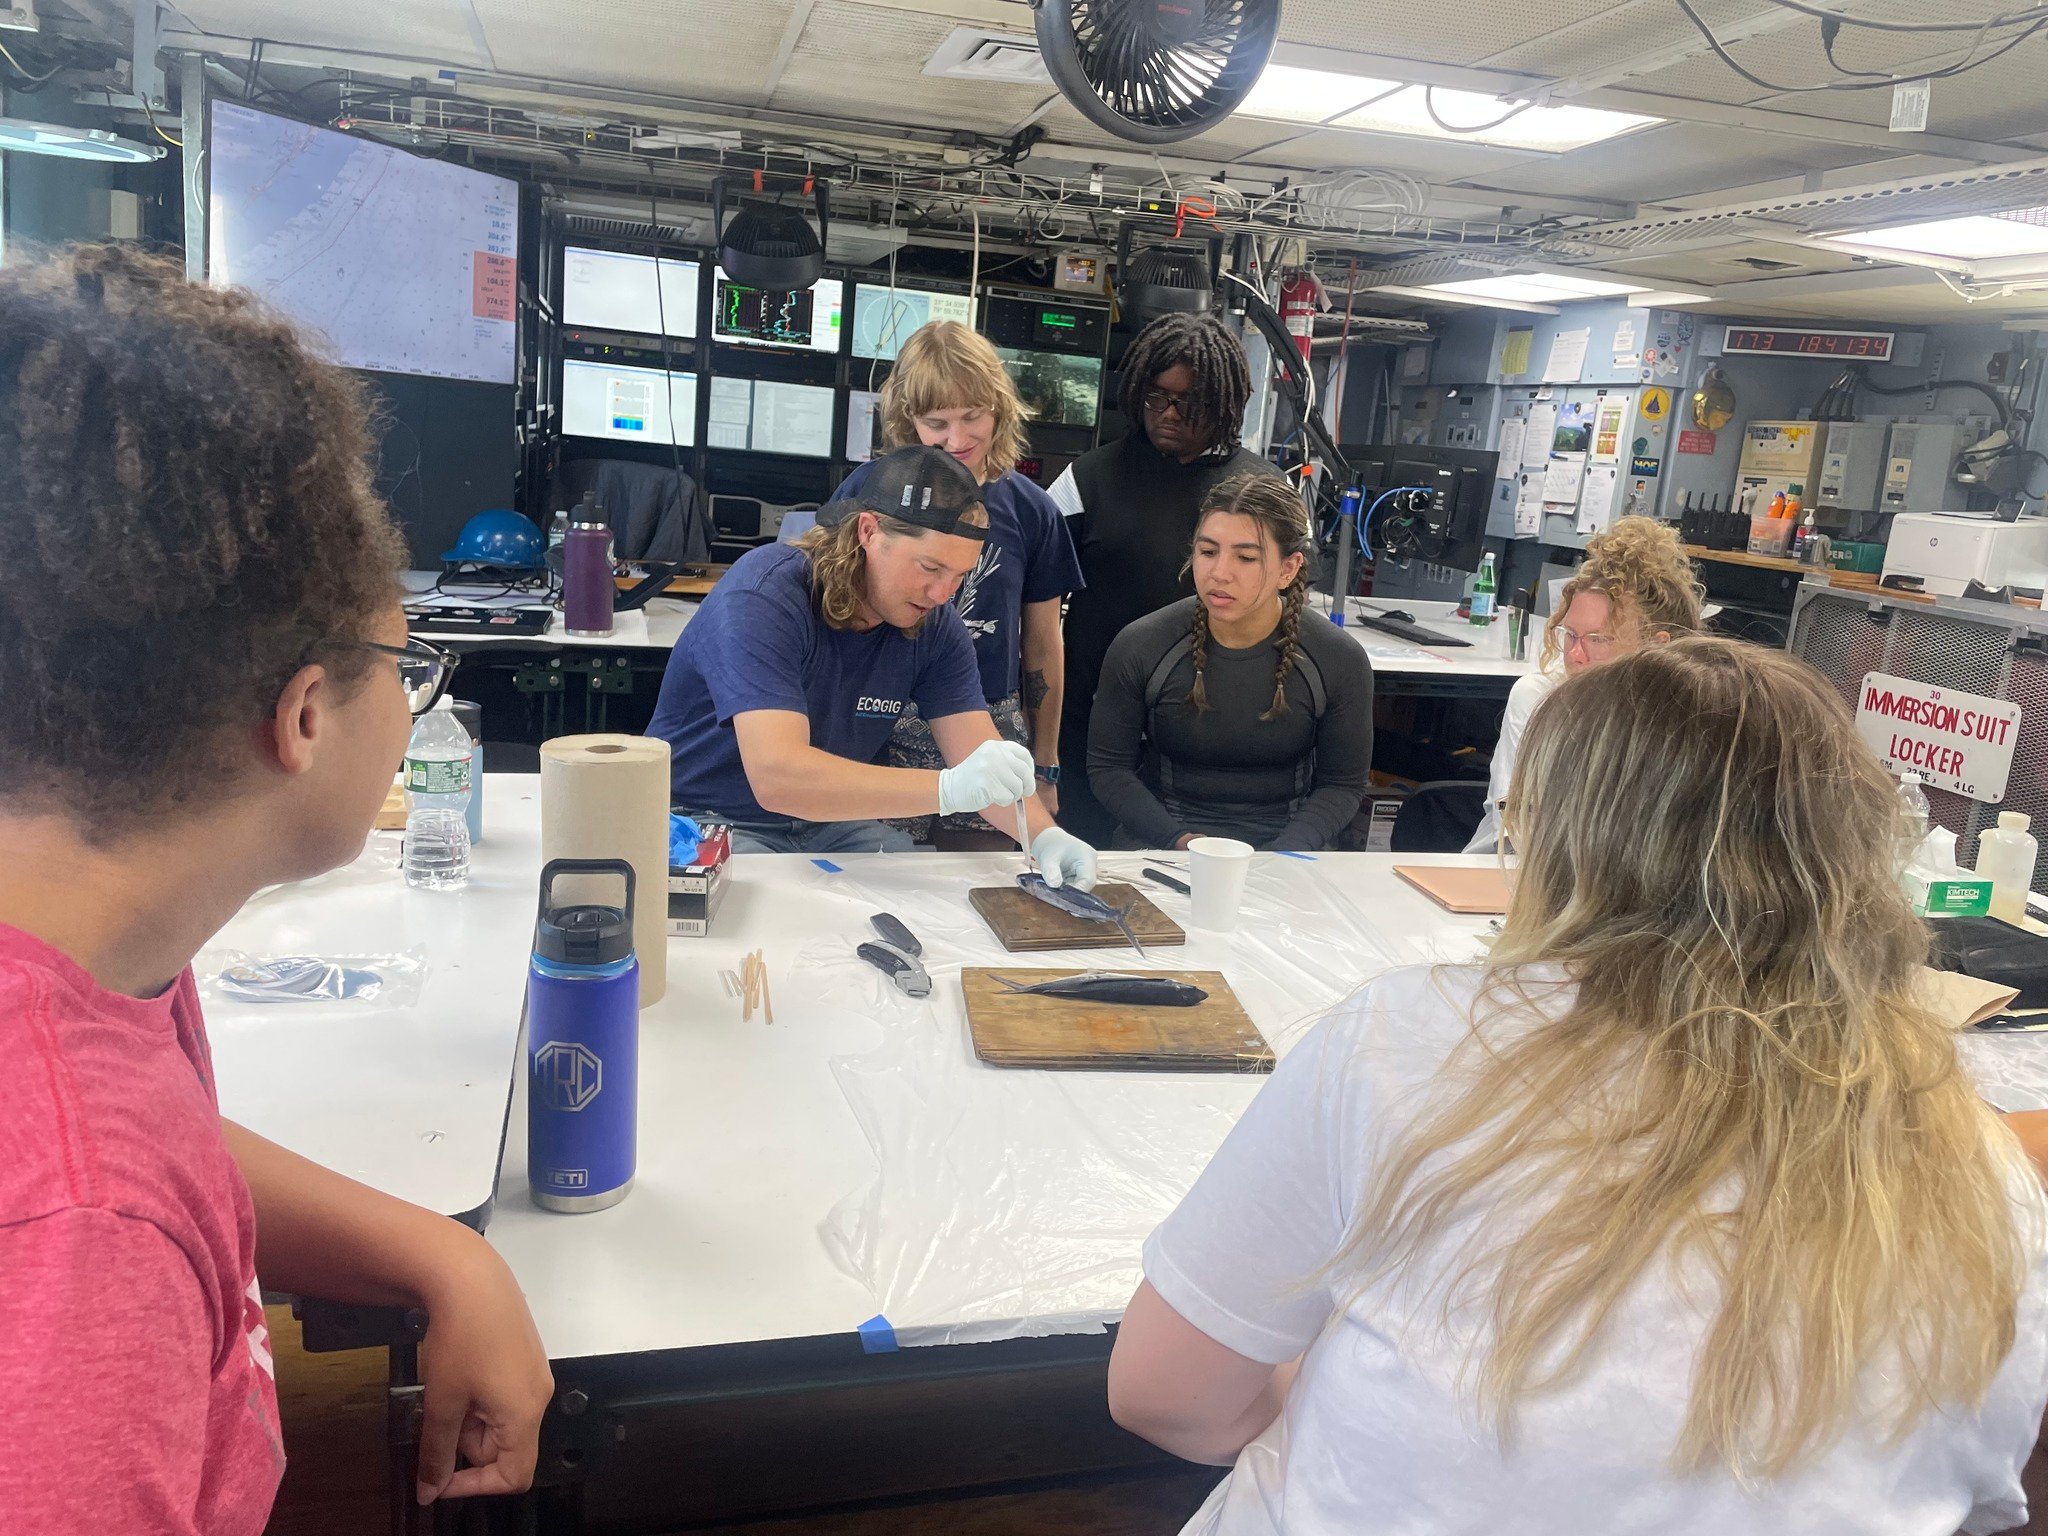 Students sit around a white table dissecting two fish.